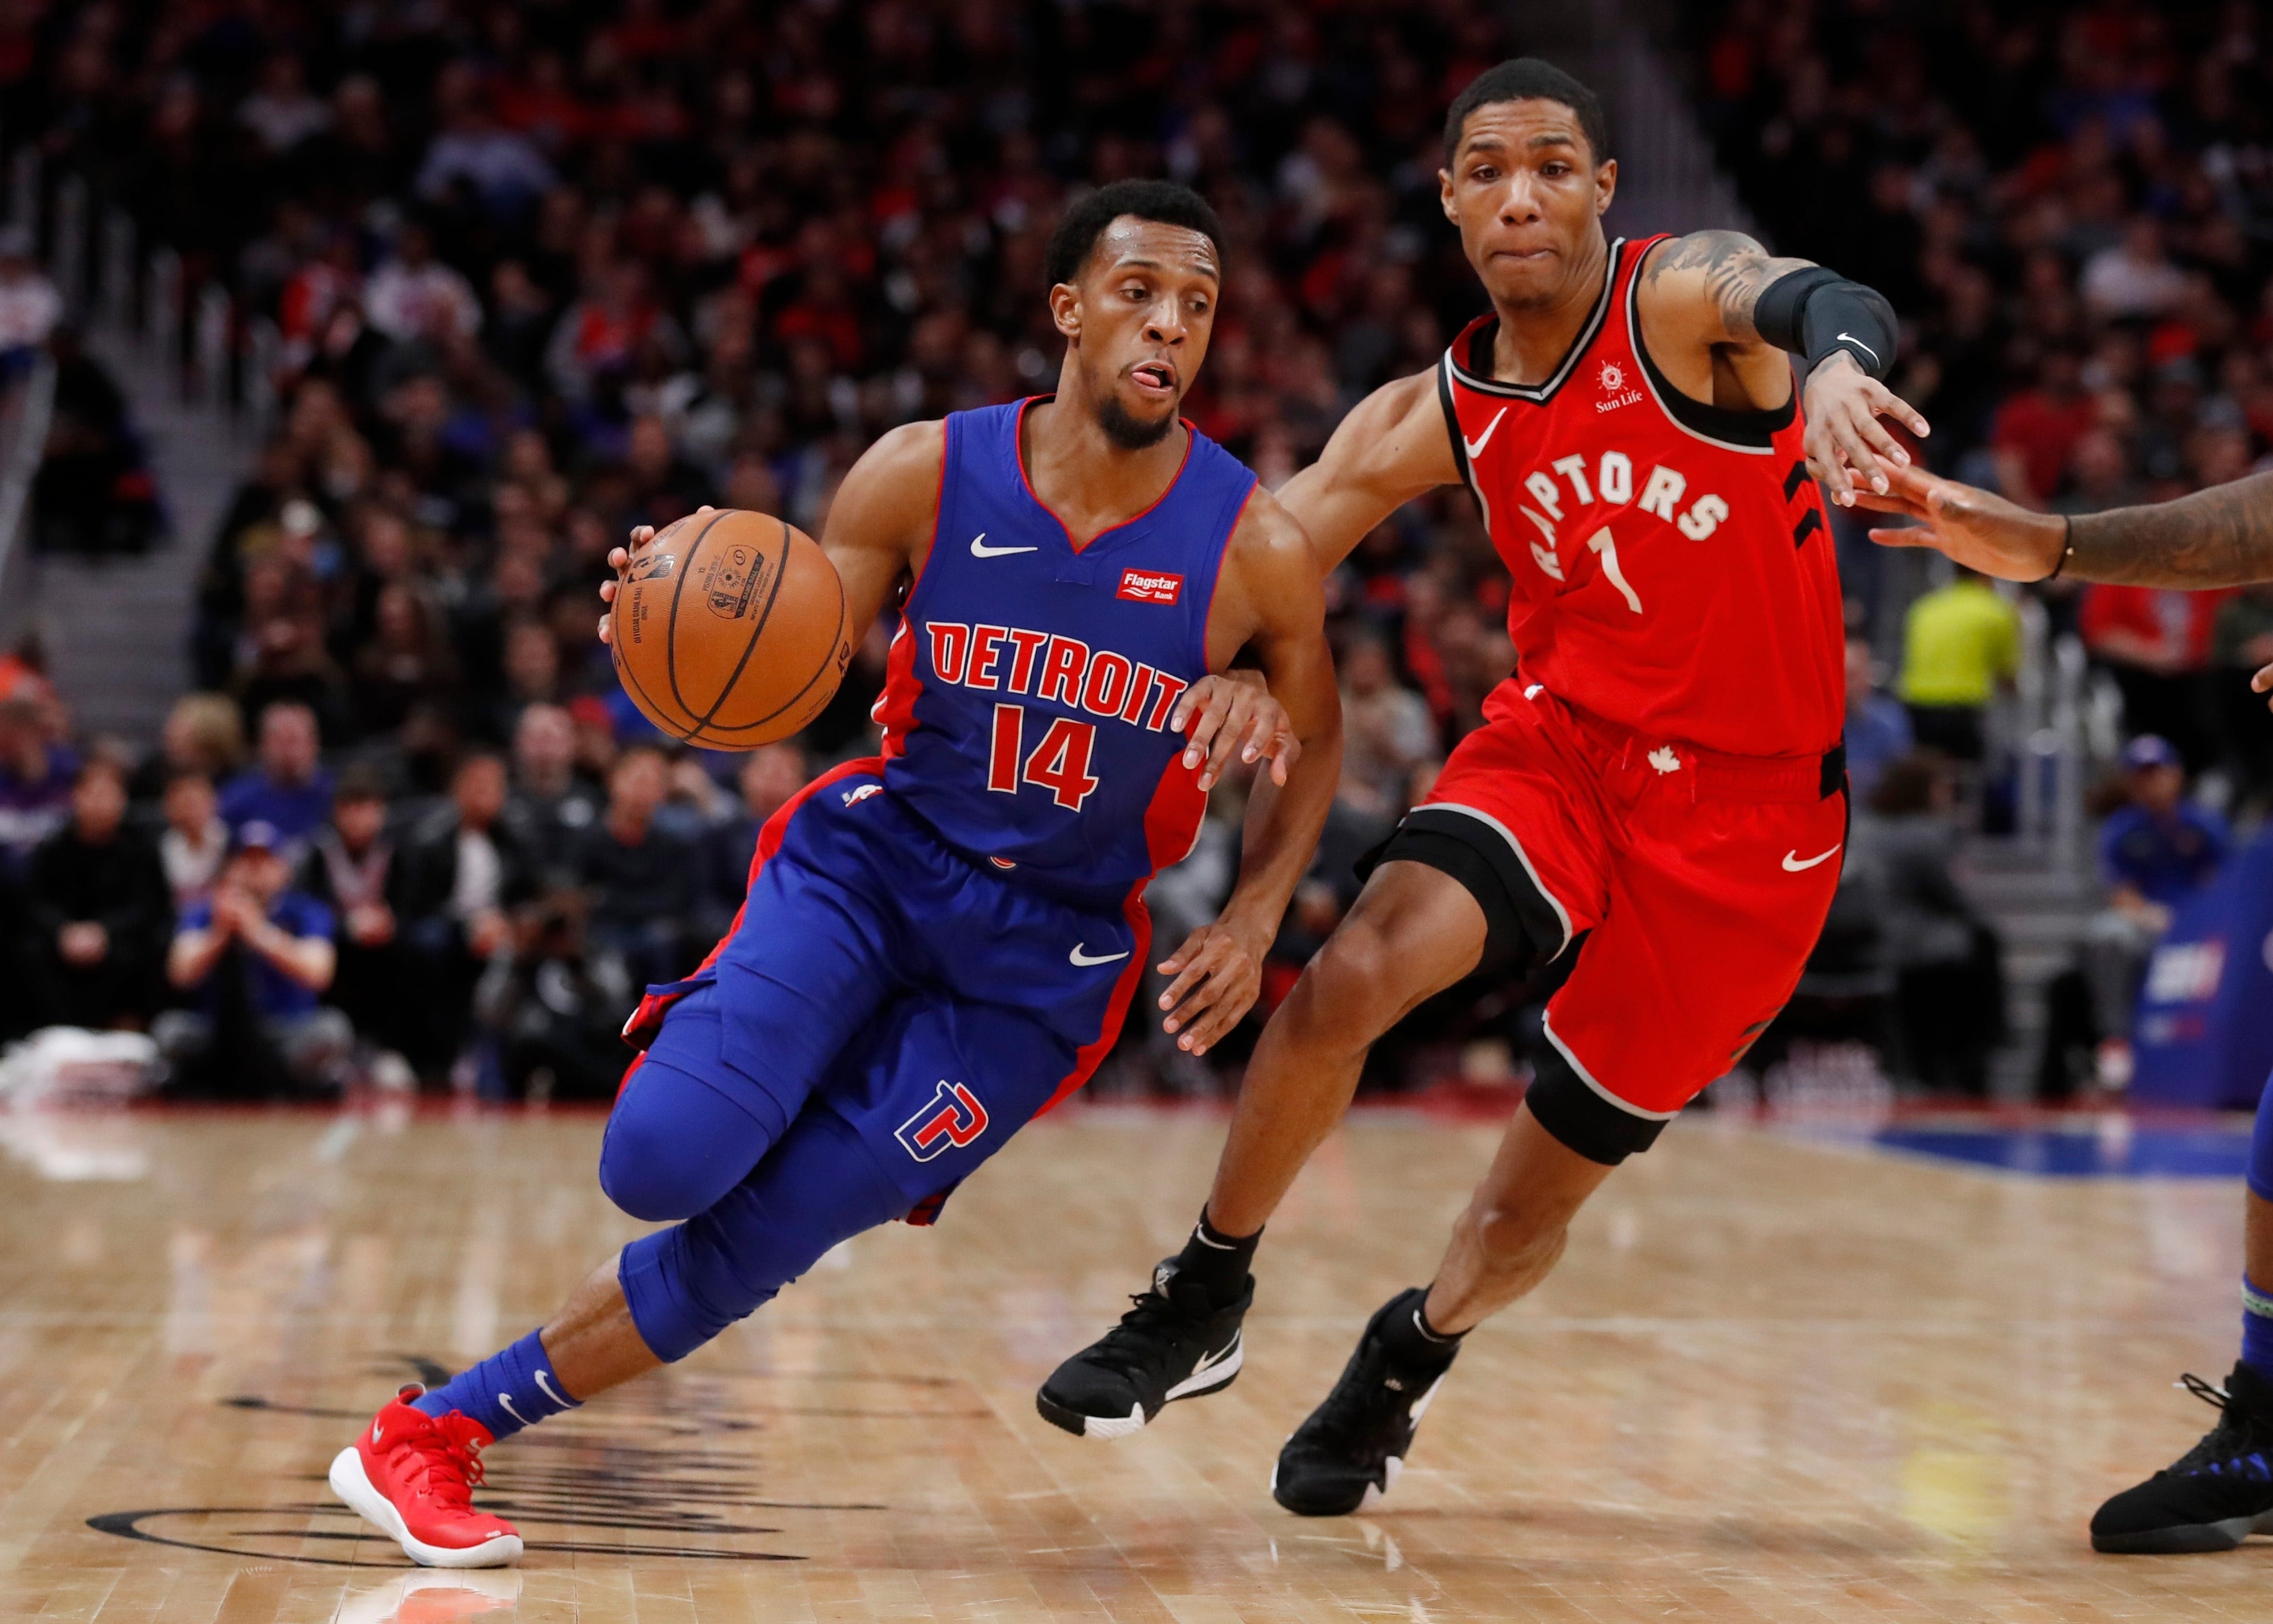 Detroit Pistons guard Ish Smith (14) drives against Toronto Raptors guard Patrick McCaw (1) during the first half.